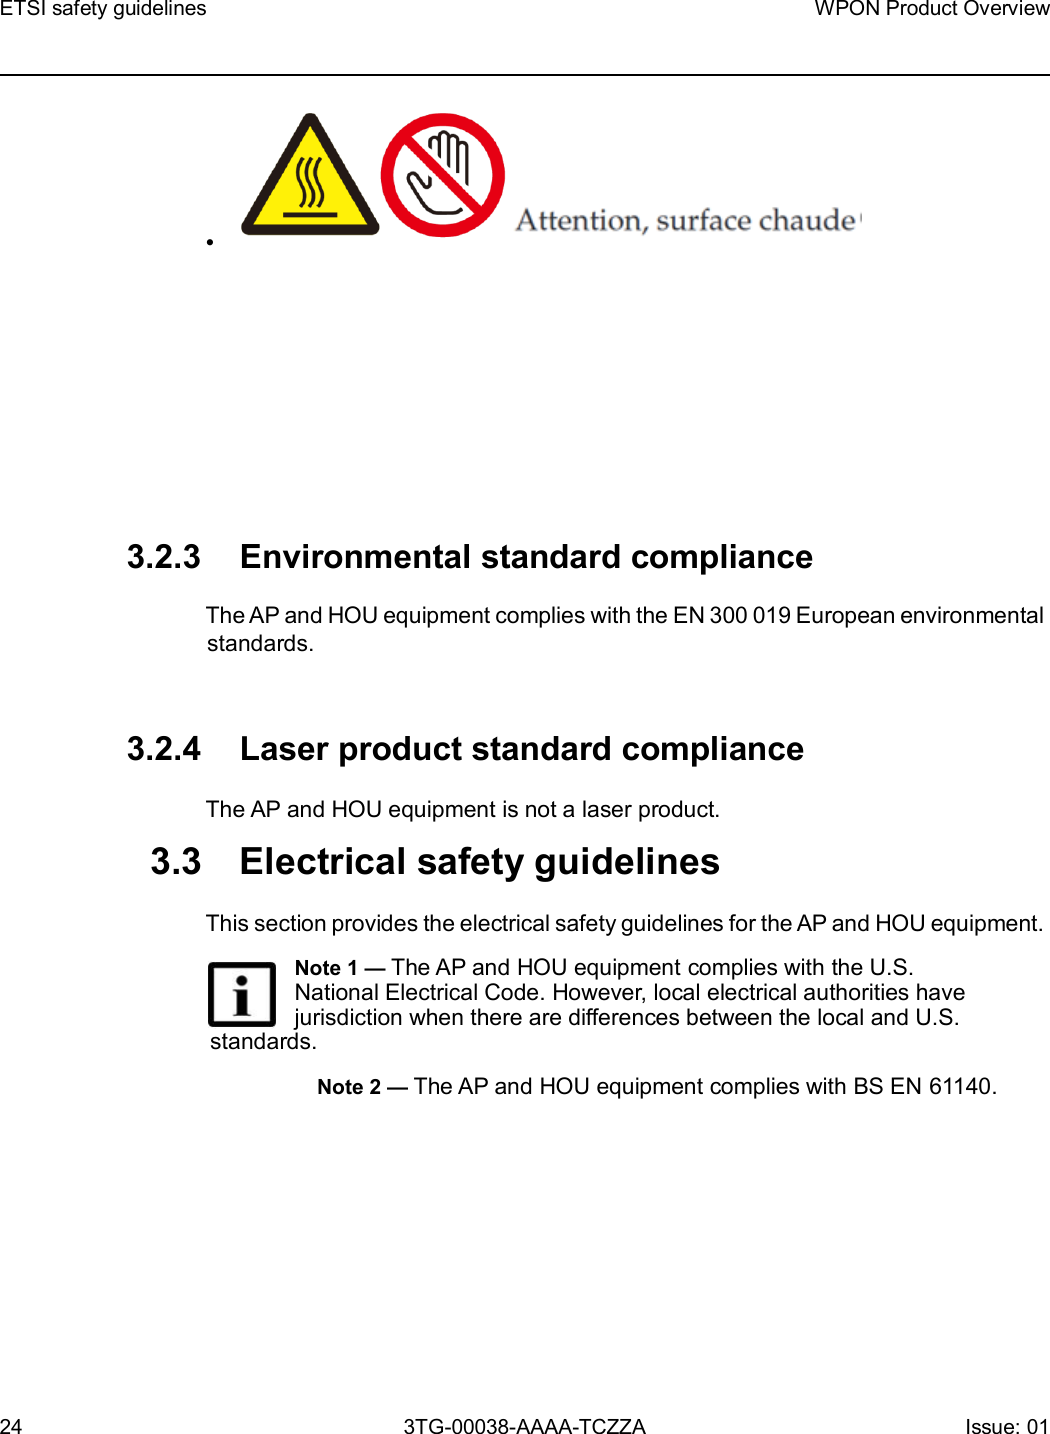 Page 24 of Nokia Bell 7577WPONAPAC WPON User Manual WPON Product Overview